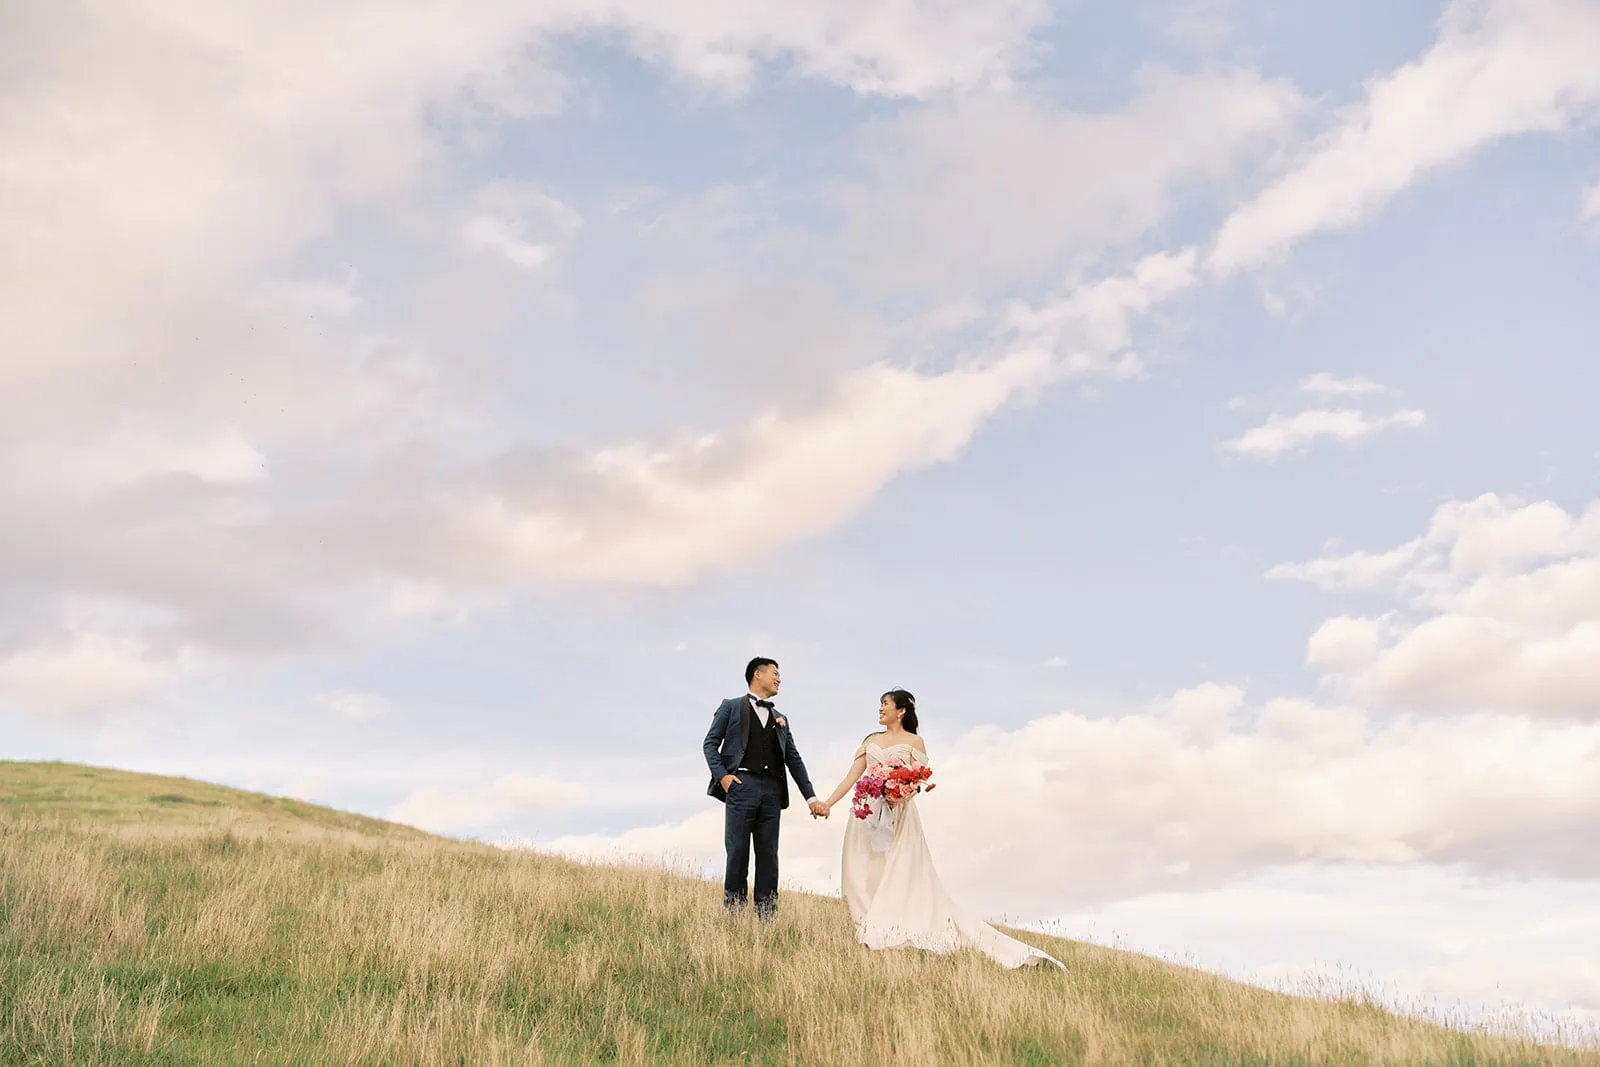 Queenstown Elopement Heli Wedding Photographer クイーンズタウン結婚式 | A couple embracing during their pre-wedding photoshoot on top of a grassy hill.